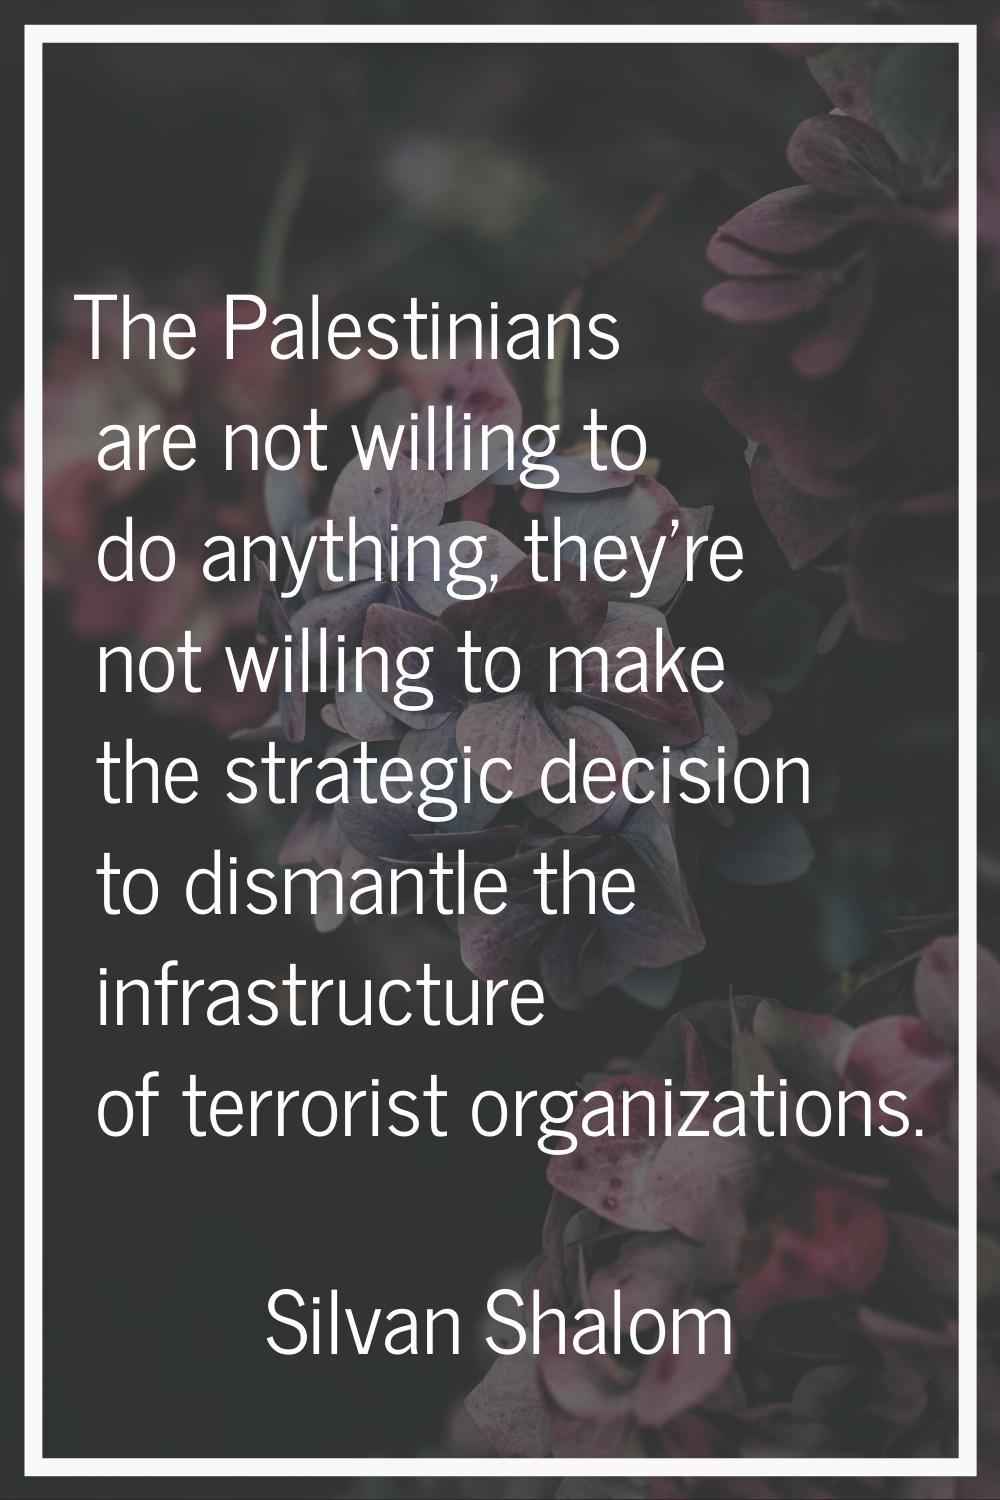 The Palestinians are not willing to do anything, they're not willing to make the strategic decision